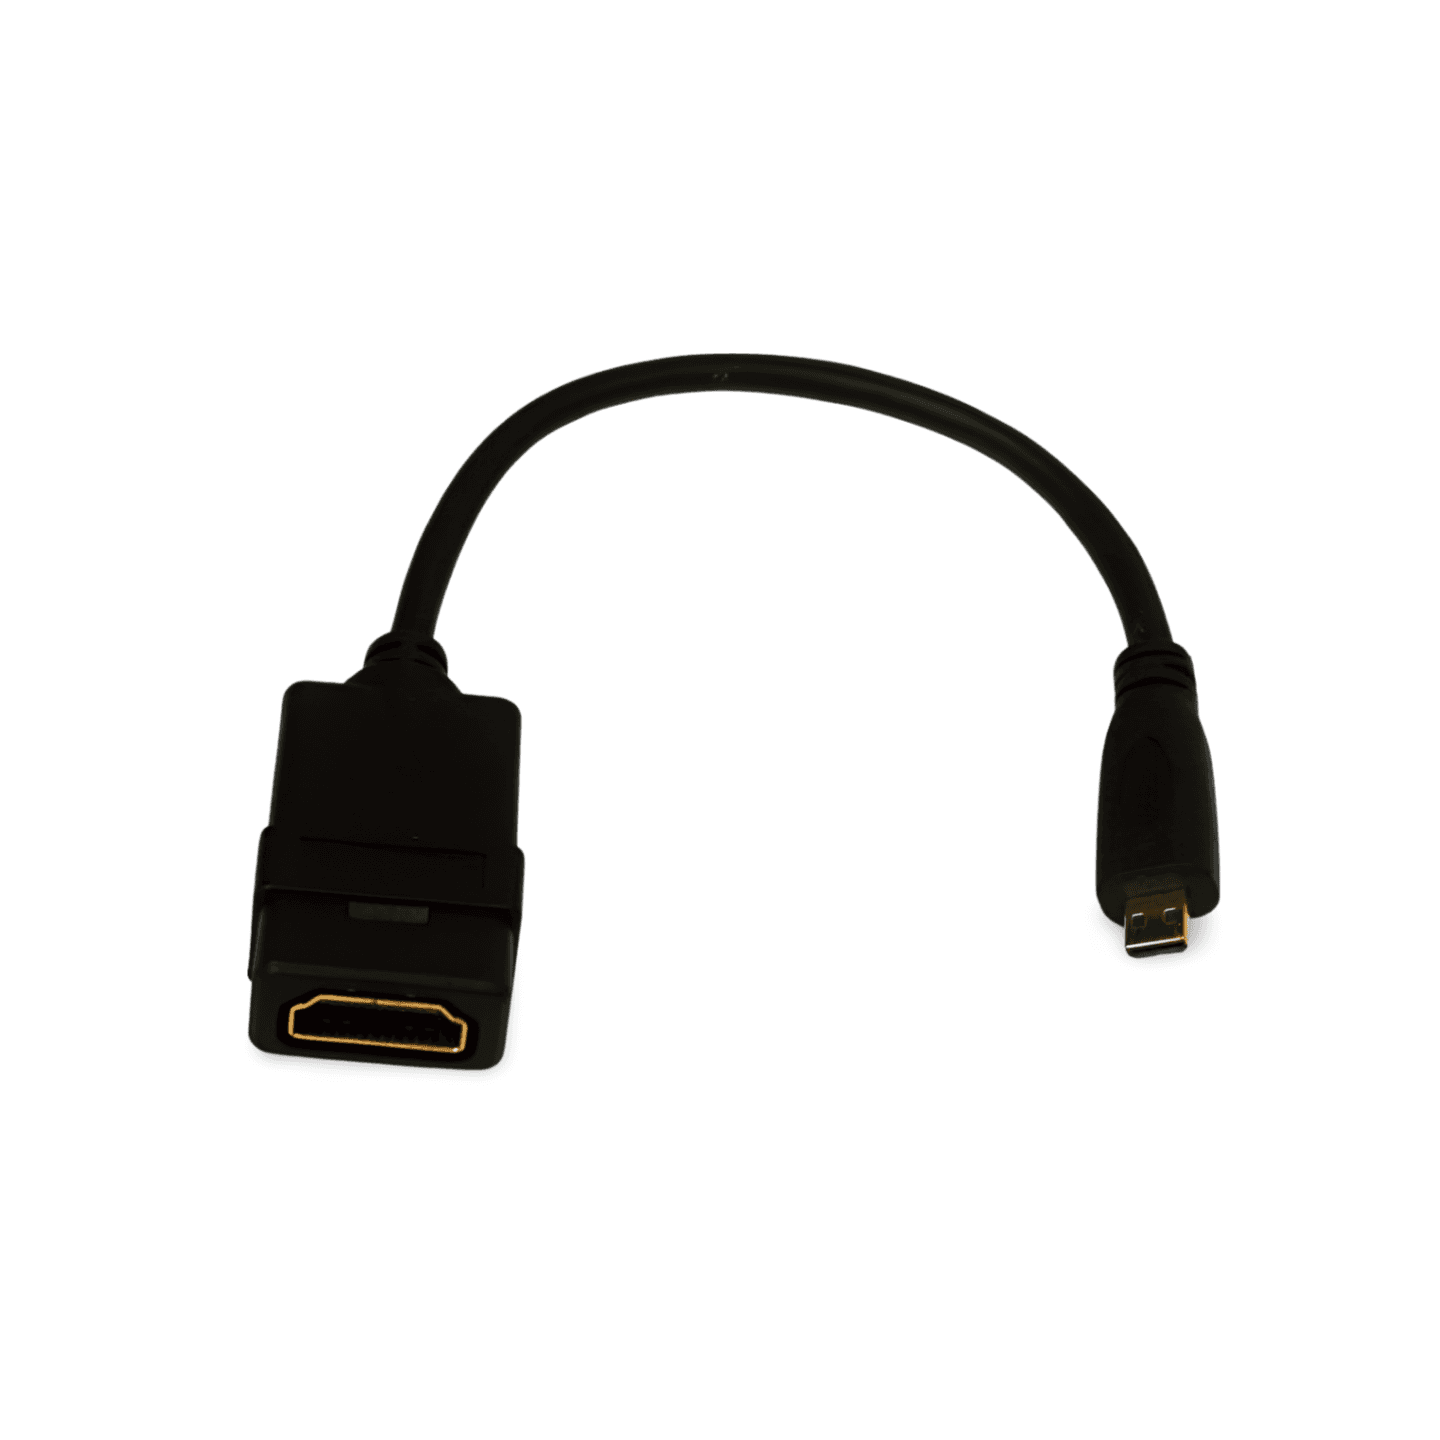 8in Micro HDMI Type D Male to HDMI Type A Female Adapter Cable black